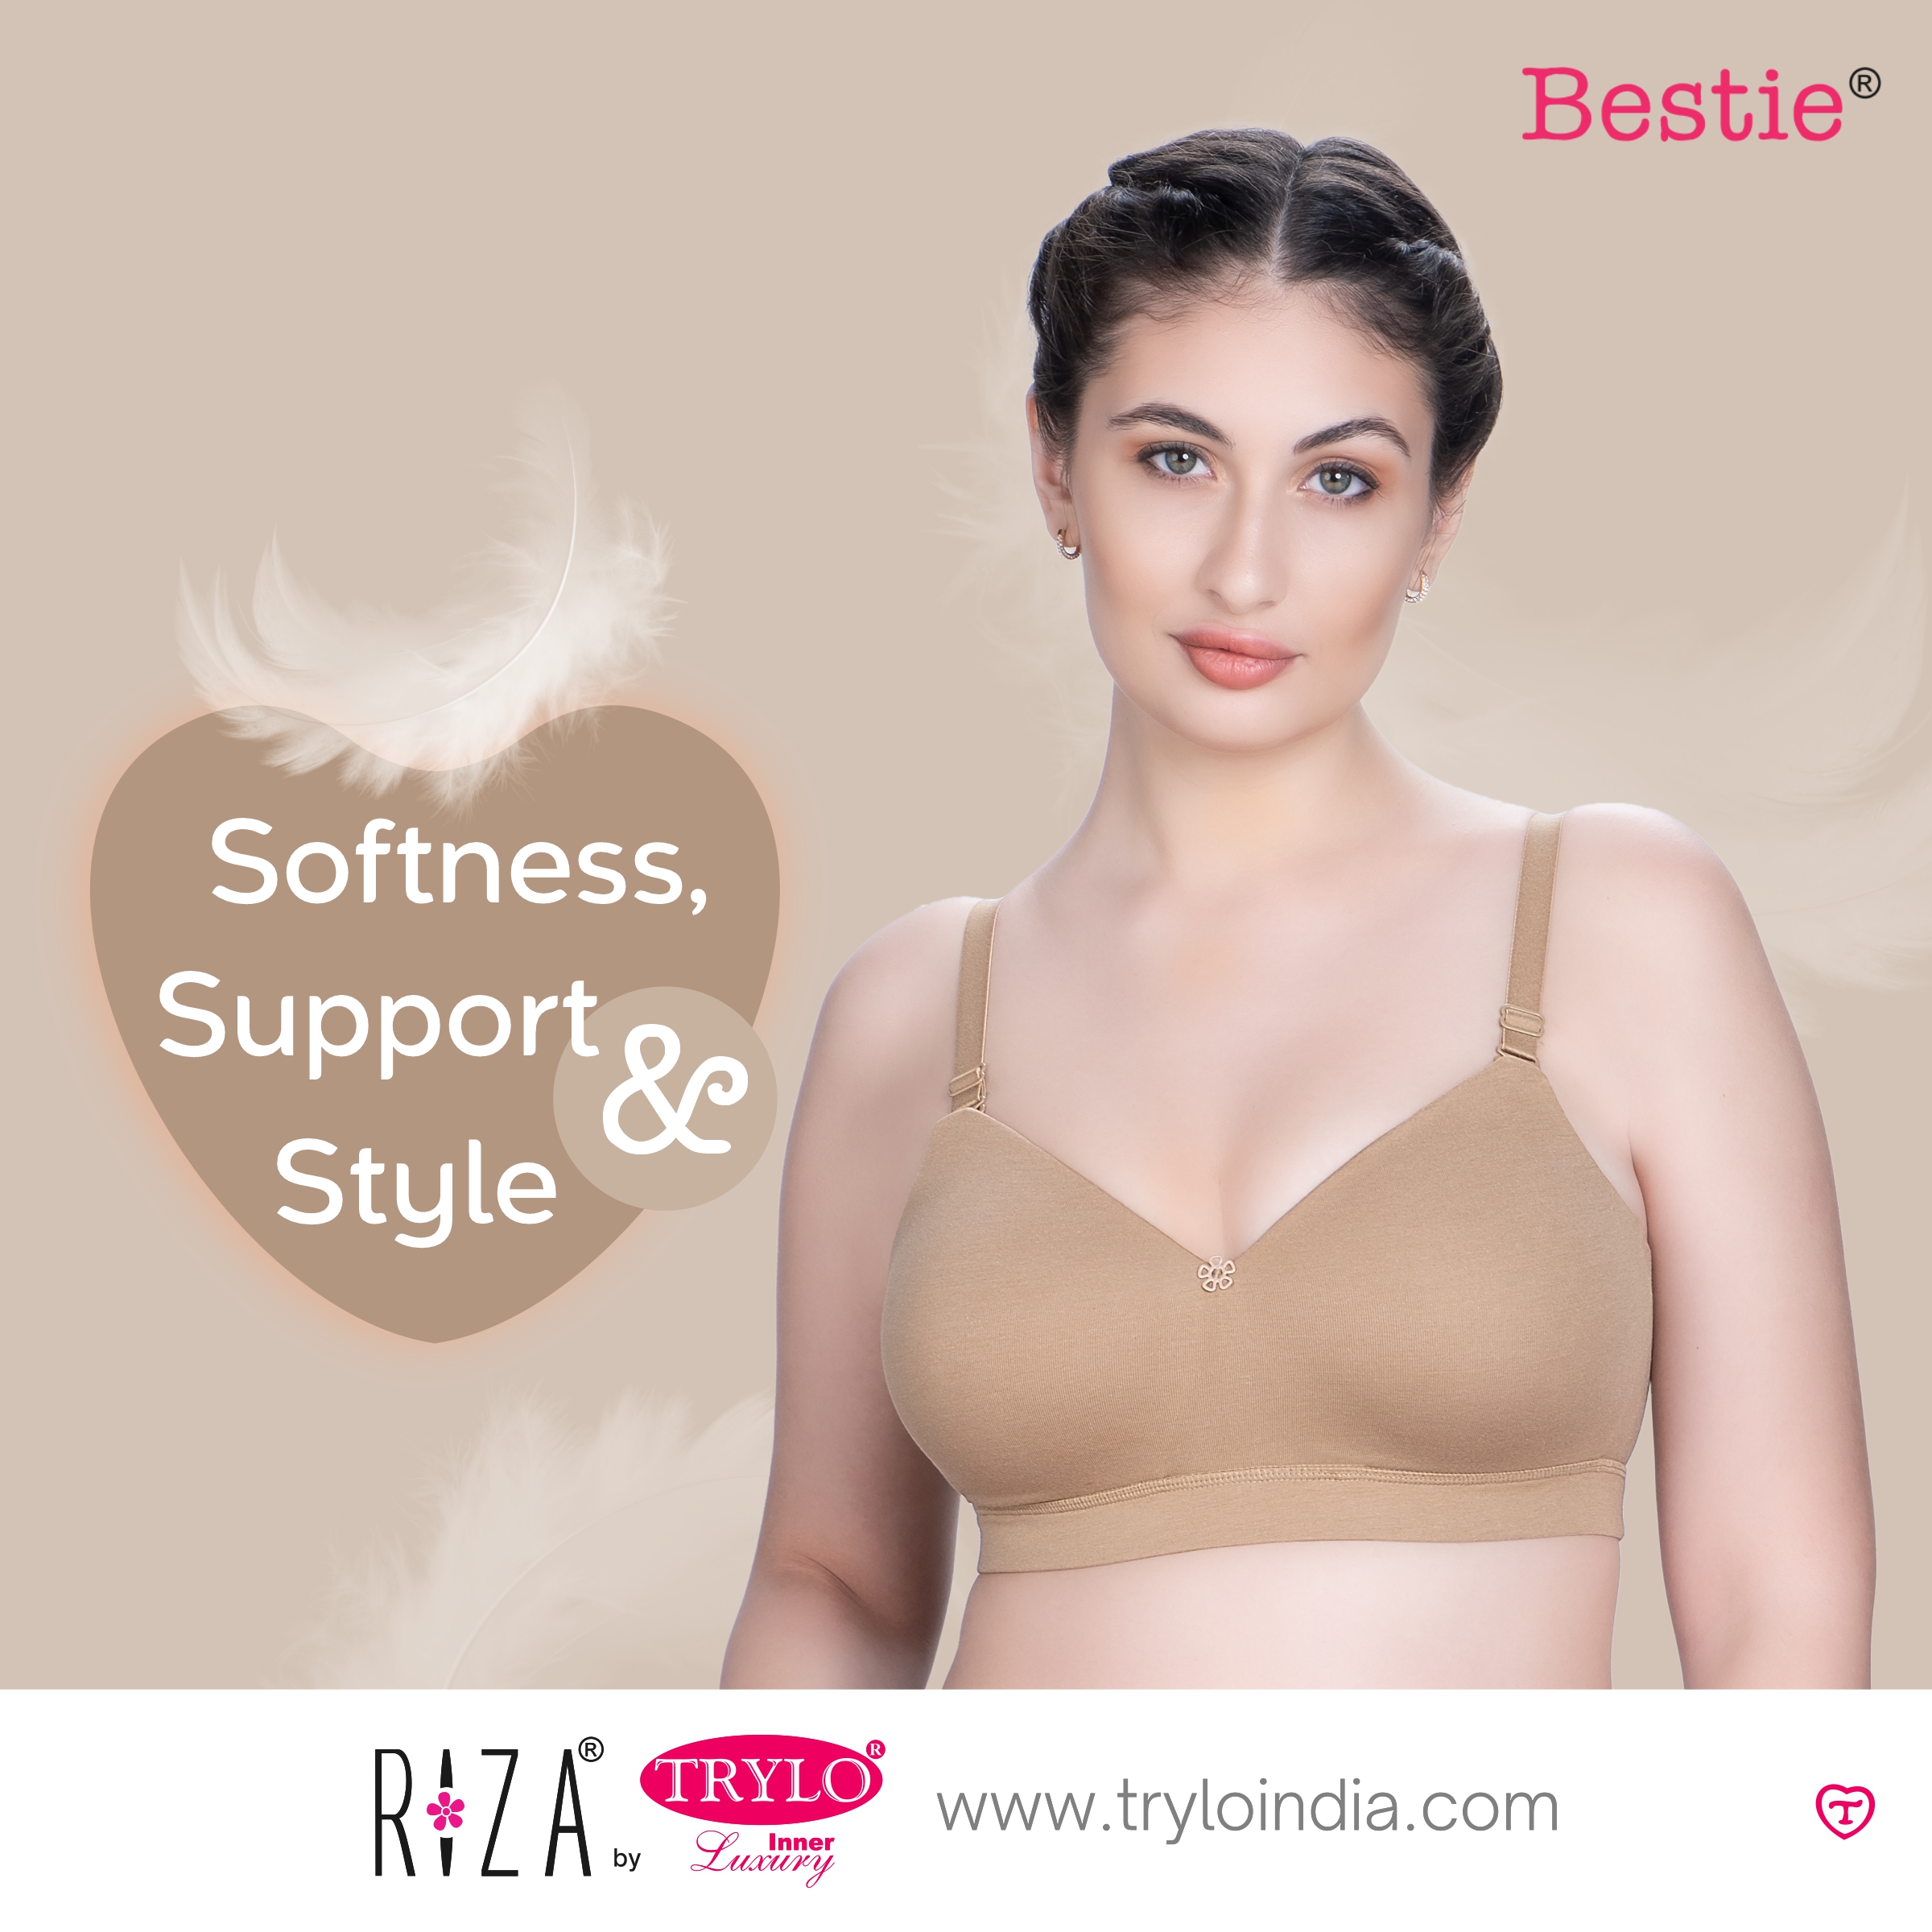 Trylo Intimates on X: Who says you can't have it all? Riza Bestie combines  luxurious comfort with everyday support and a touch of style. Product shown  - Riza Bestie #TryloIndia #TryloIntimates #RizaIntimates #